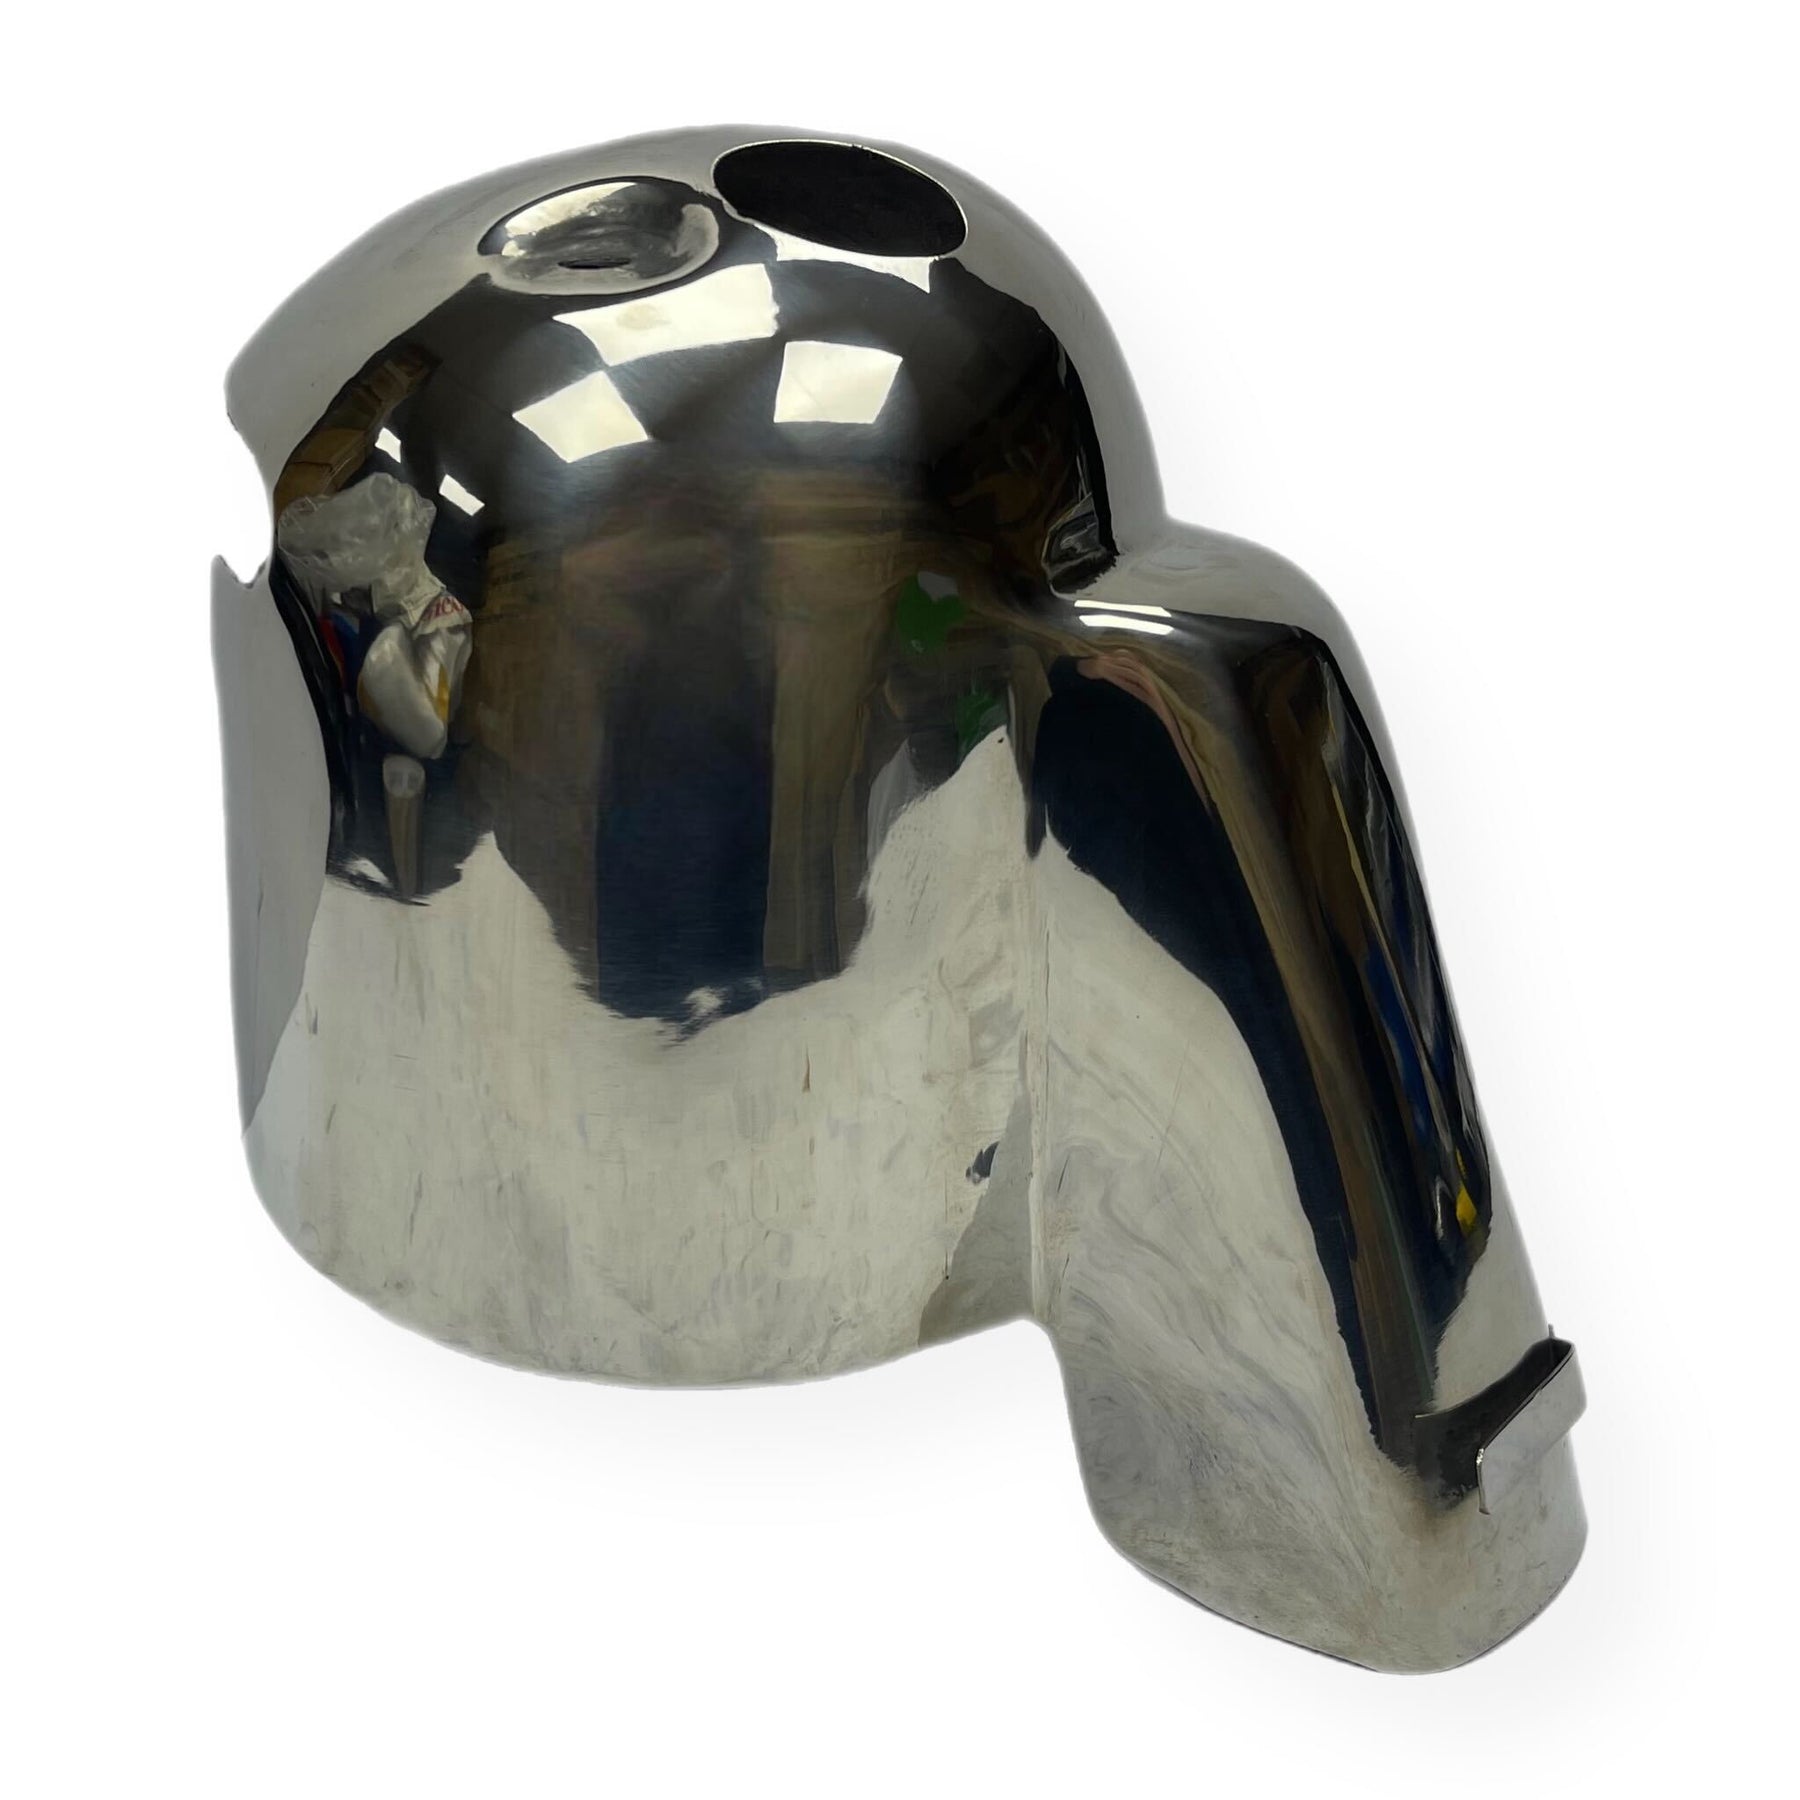 Vespa PX200 P200E Rally 200 Cylinder Head Cowling - Polished Stainless Steel